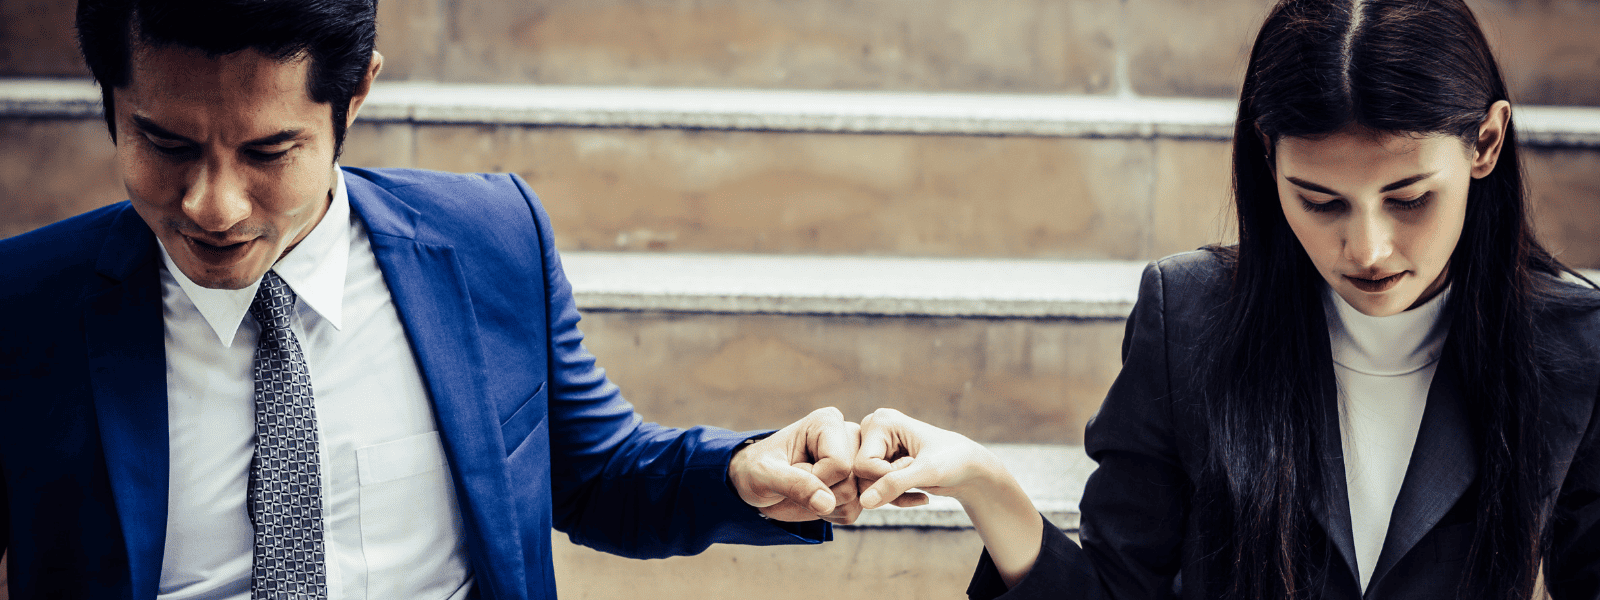 7 Tips for Working with Your Spouse in Real Estate